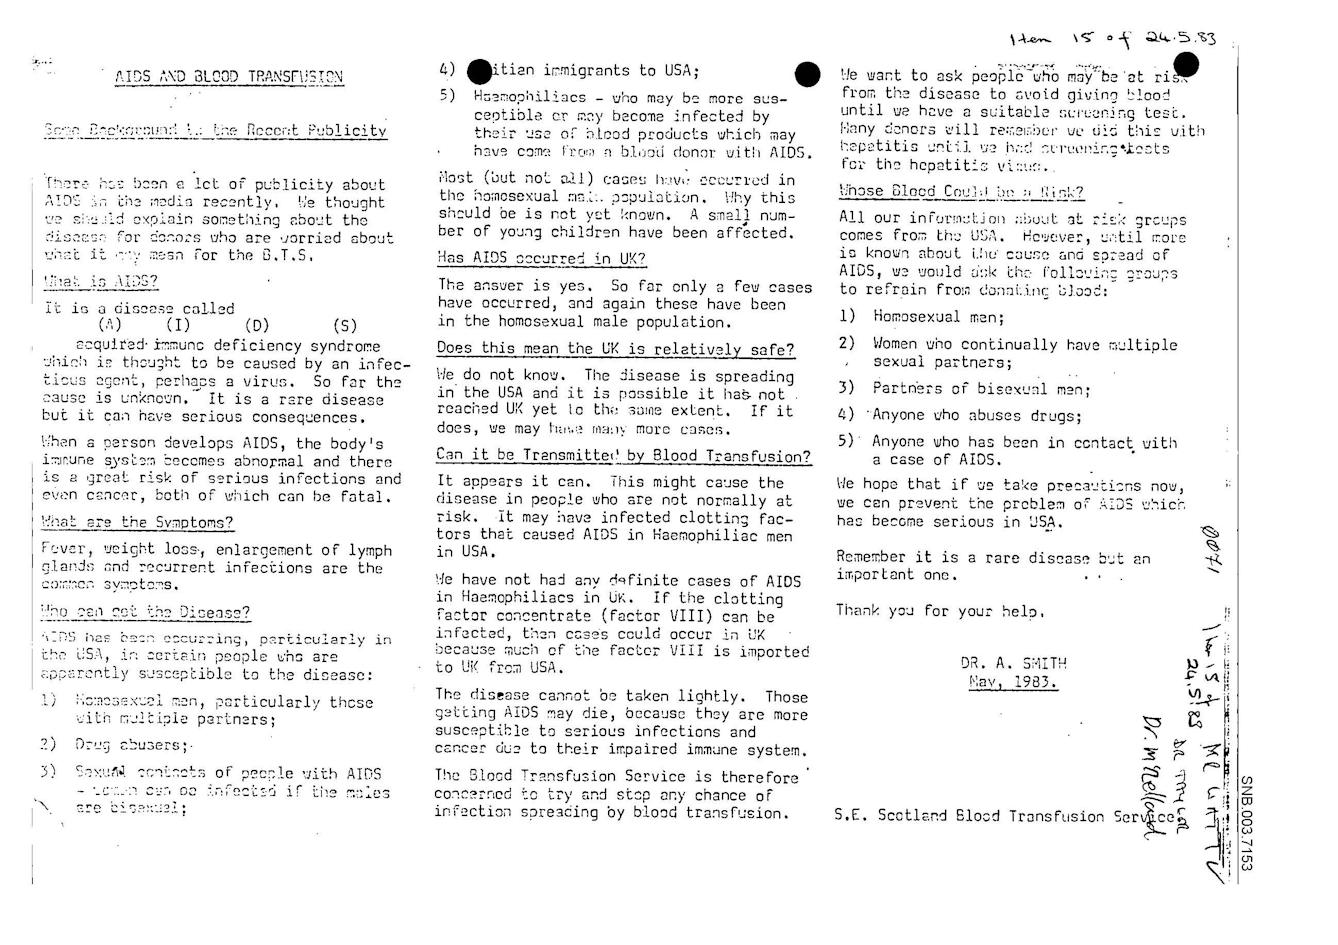 Black and white typed page titled "AIDS and Blood Transfusion", signed Dr A. Smith and dated May, 1983. Headings include "Has AIDS occured in the UK?" and "Whose blood could be a risk?"